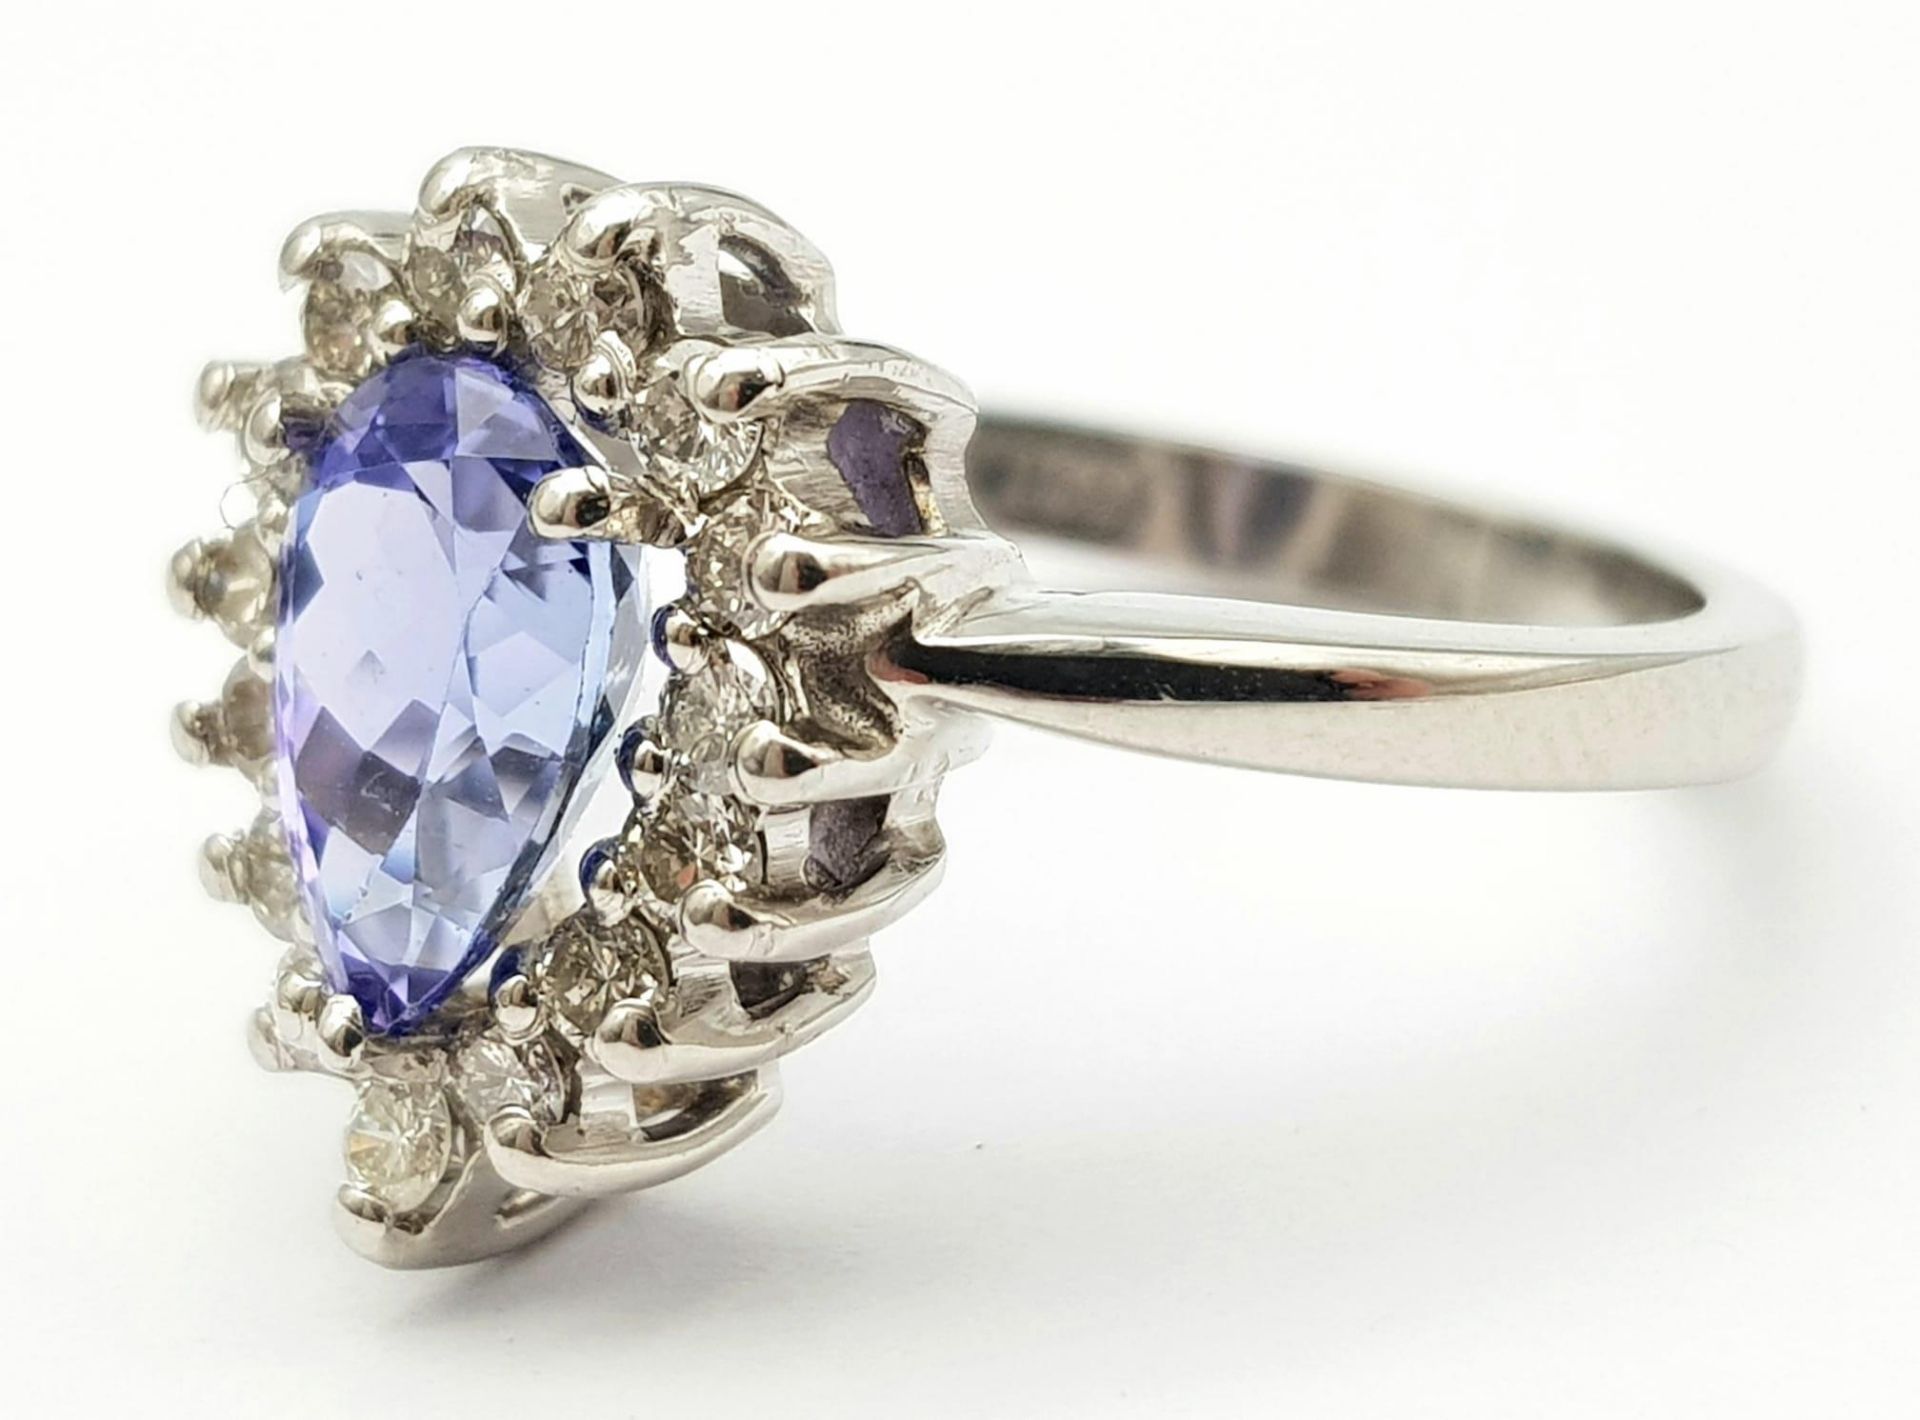 An 18 K white gold ring with a pear cut tanzanite (1.71 carats) surrounded by a halo of diamonds, - Image 4 of 12